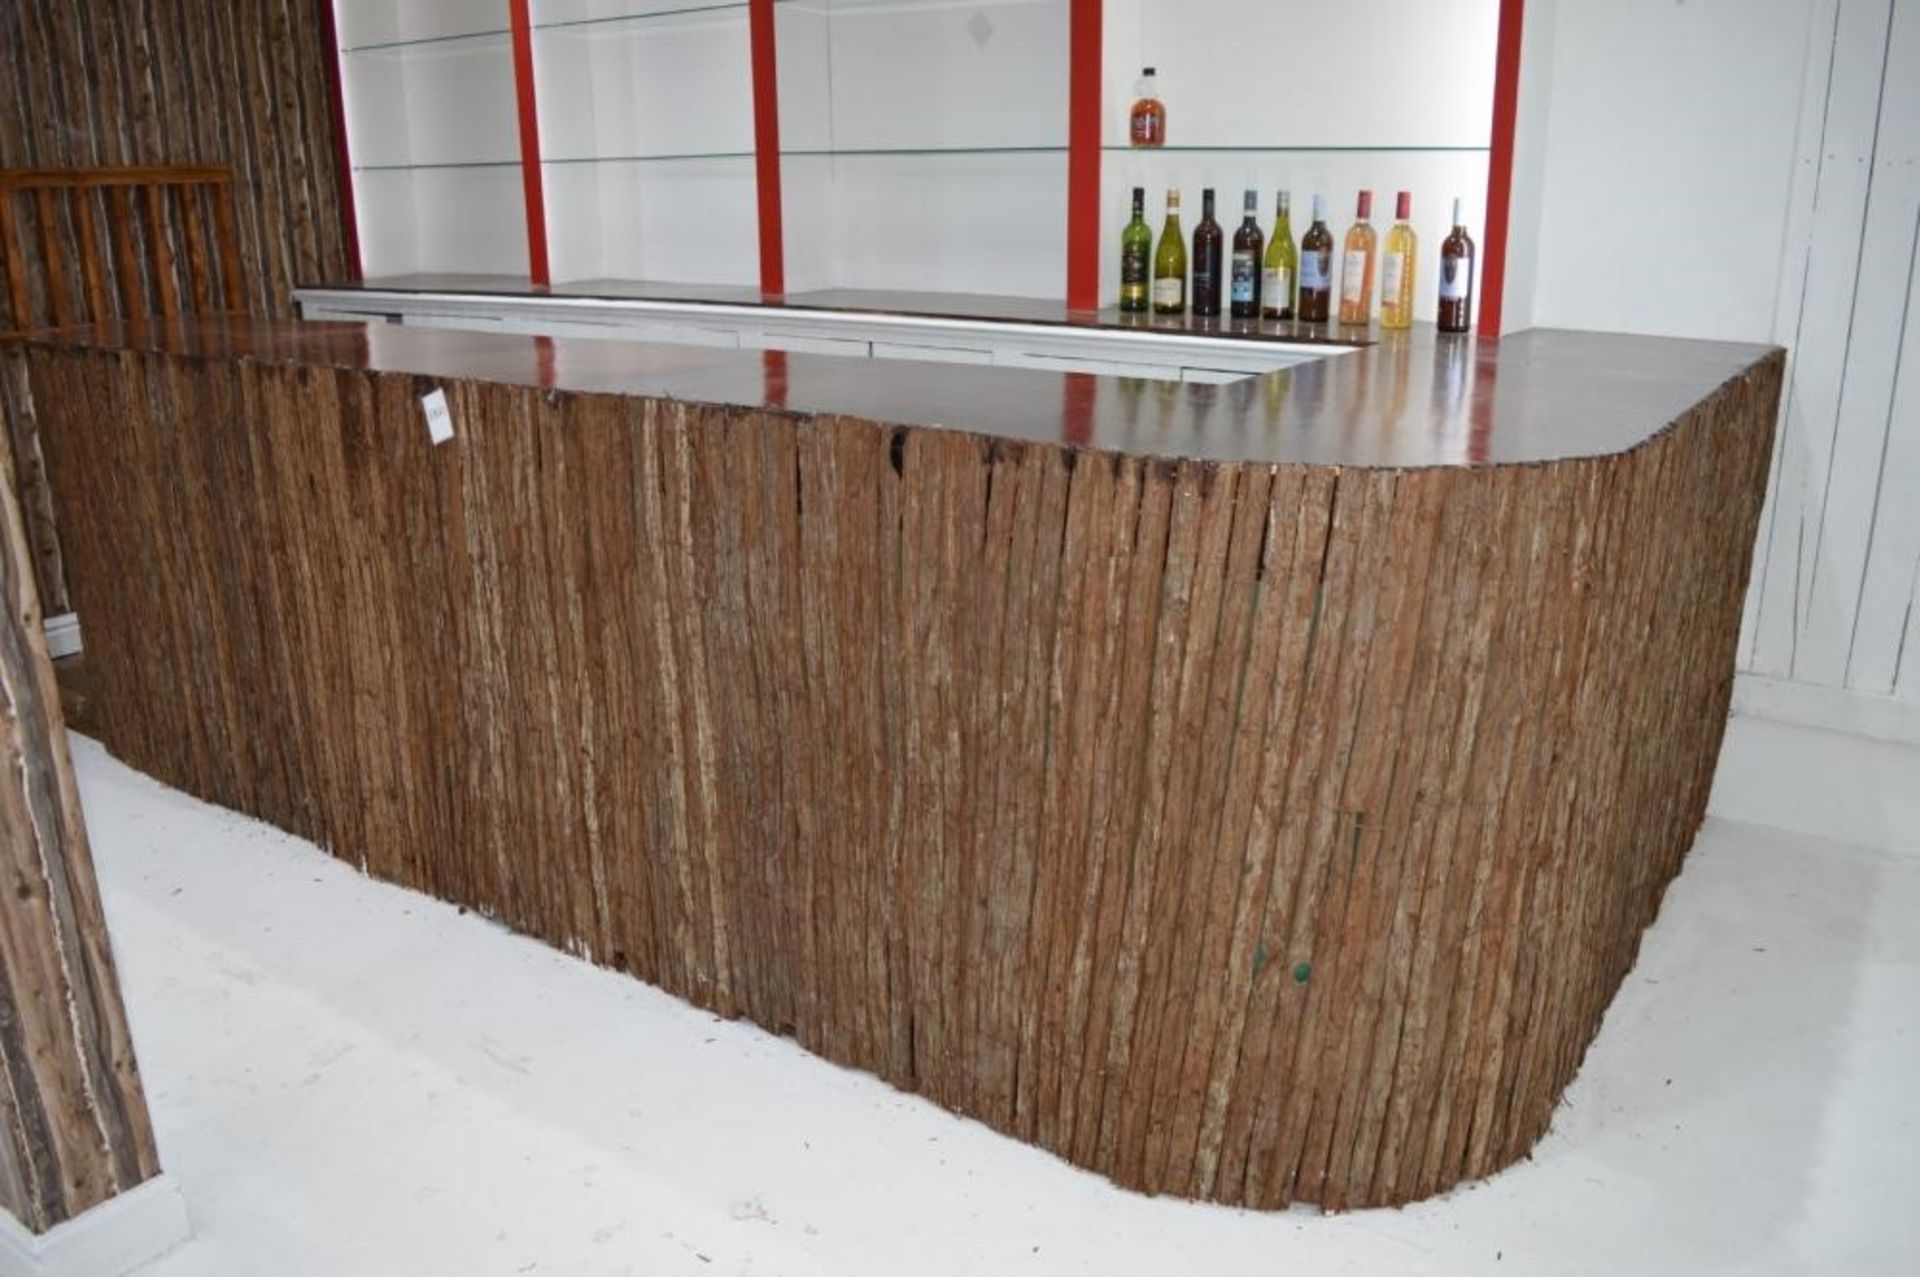 1 x Tiki Style Drinks Bar With Illuminated Rear Shelves and Unfinished Matching Seating Area - Ref B - Image 13 of 14